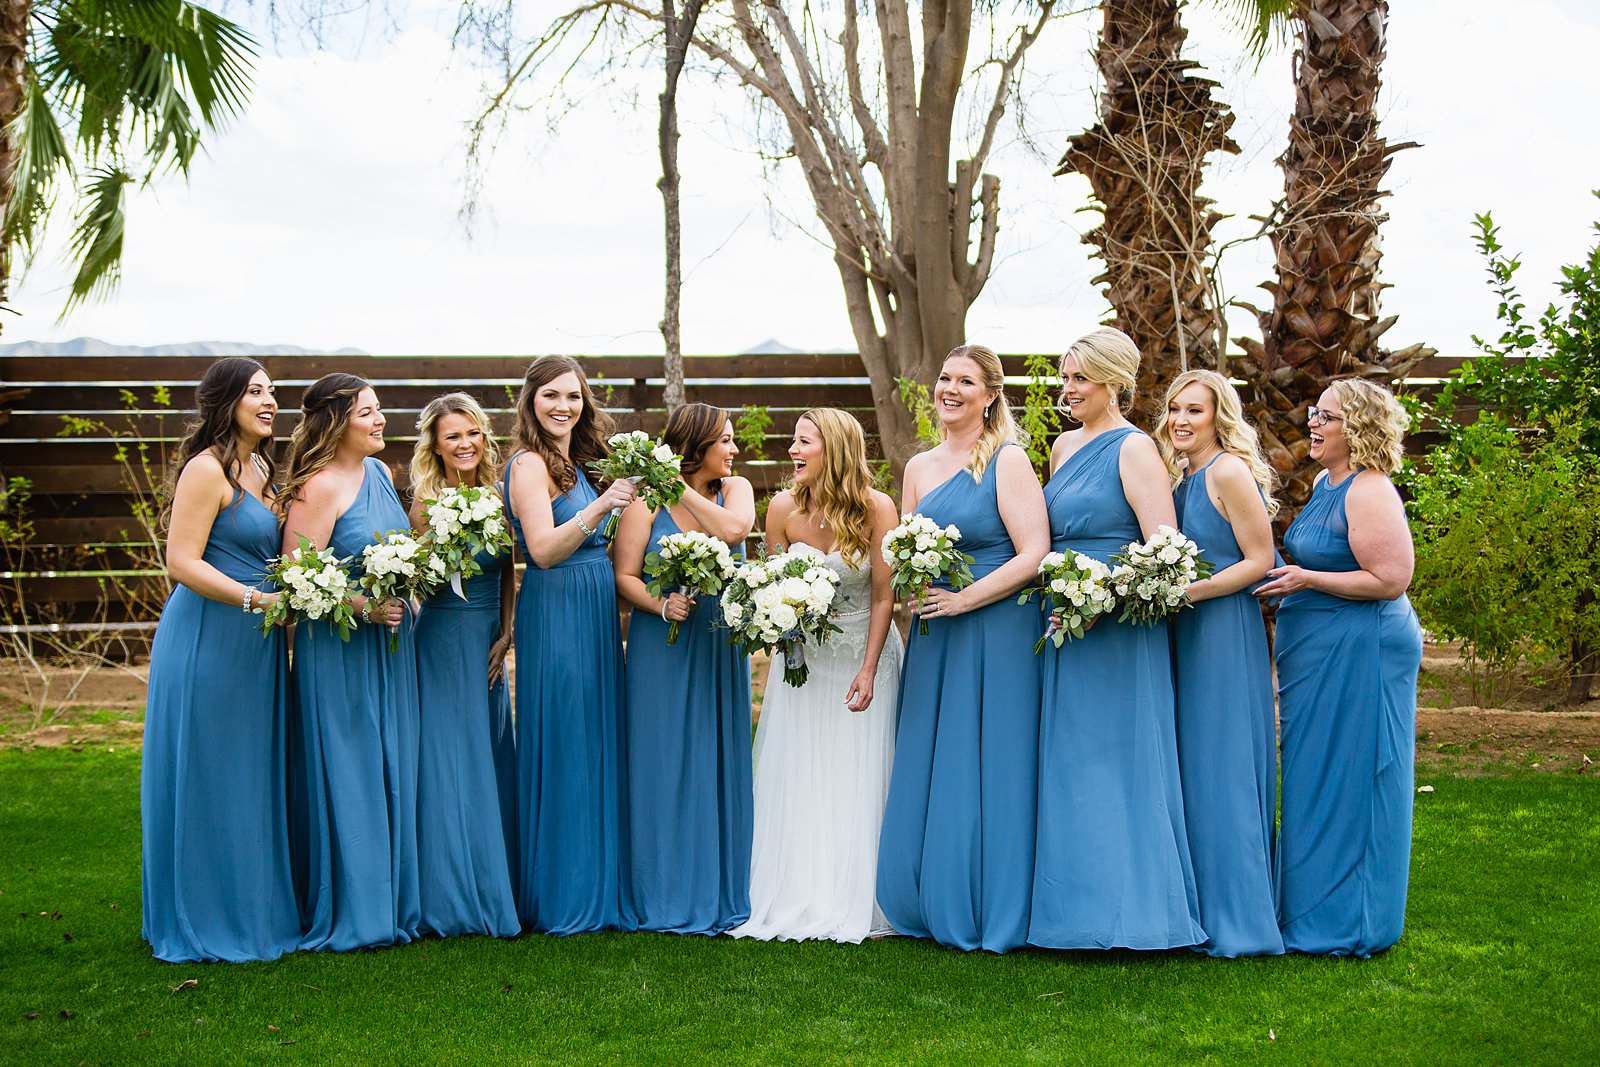 Bride and bridesmaids laughing together at Venue At The Grove wedding by Phoenix wedding photographer PMA Photography.